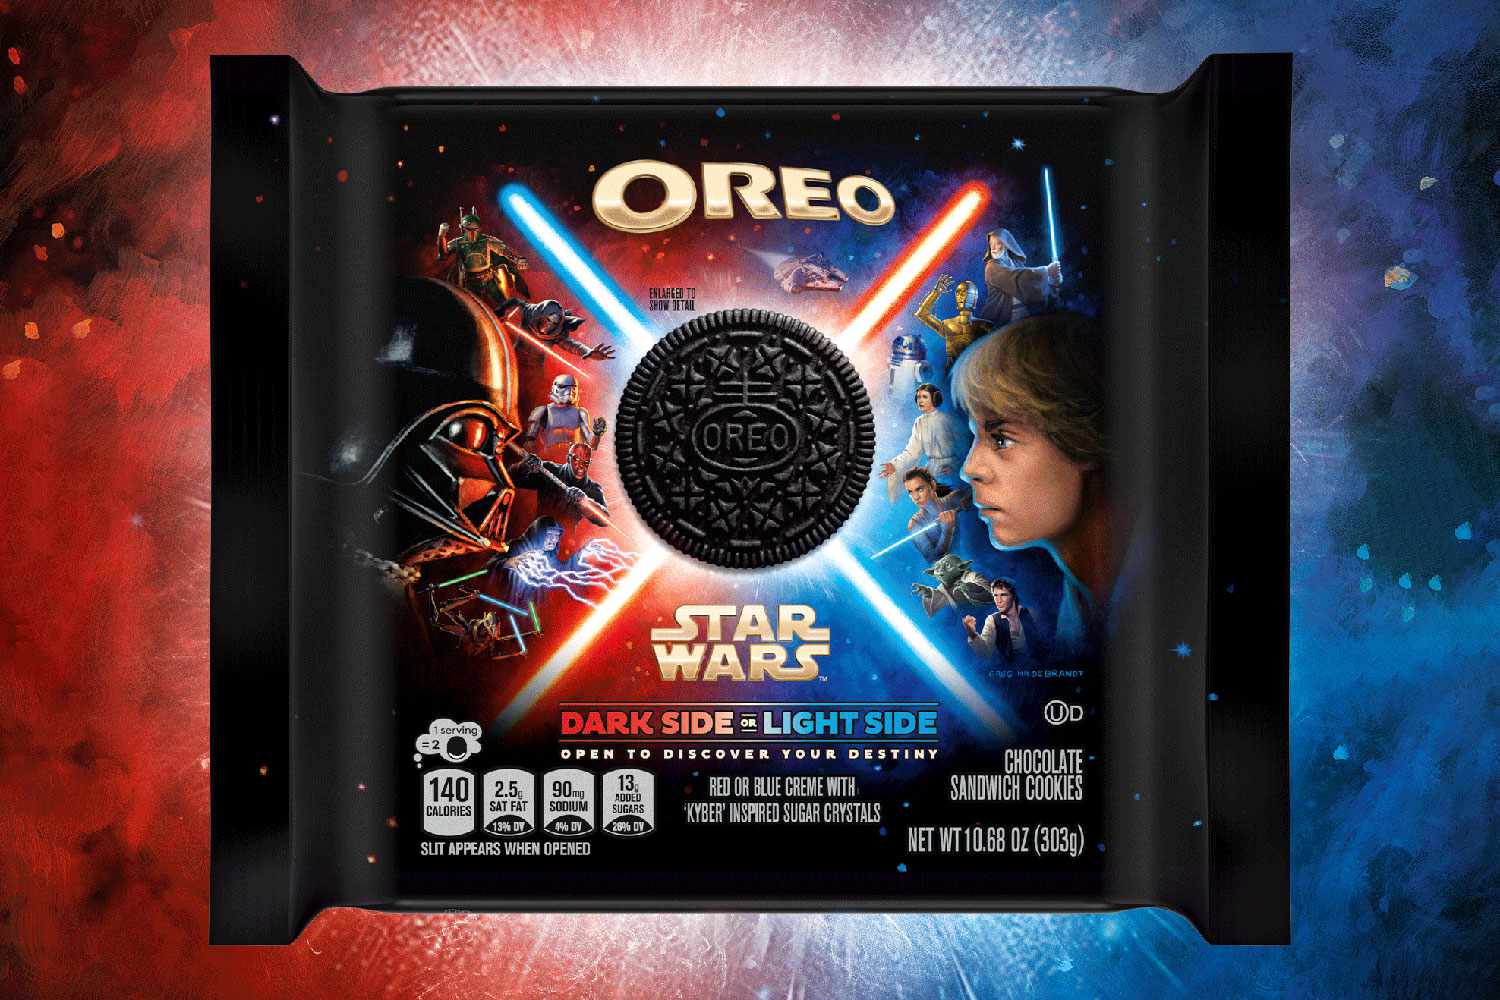 Oreo Reveals Limited Edition “Star Wars” Packs with Darth Vader, Luke Skywalker and More on Each Cookie (Exclusive)